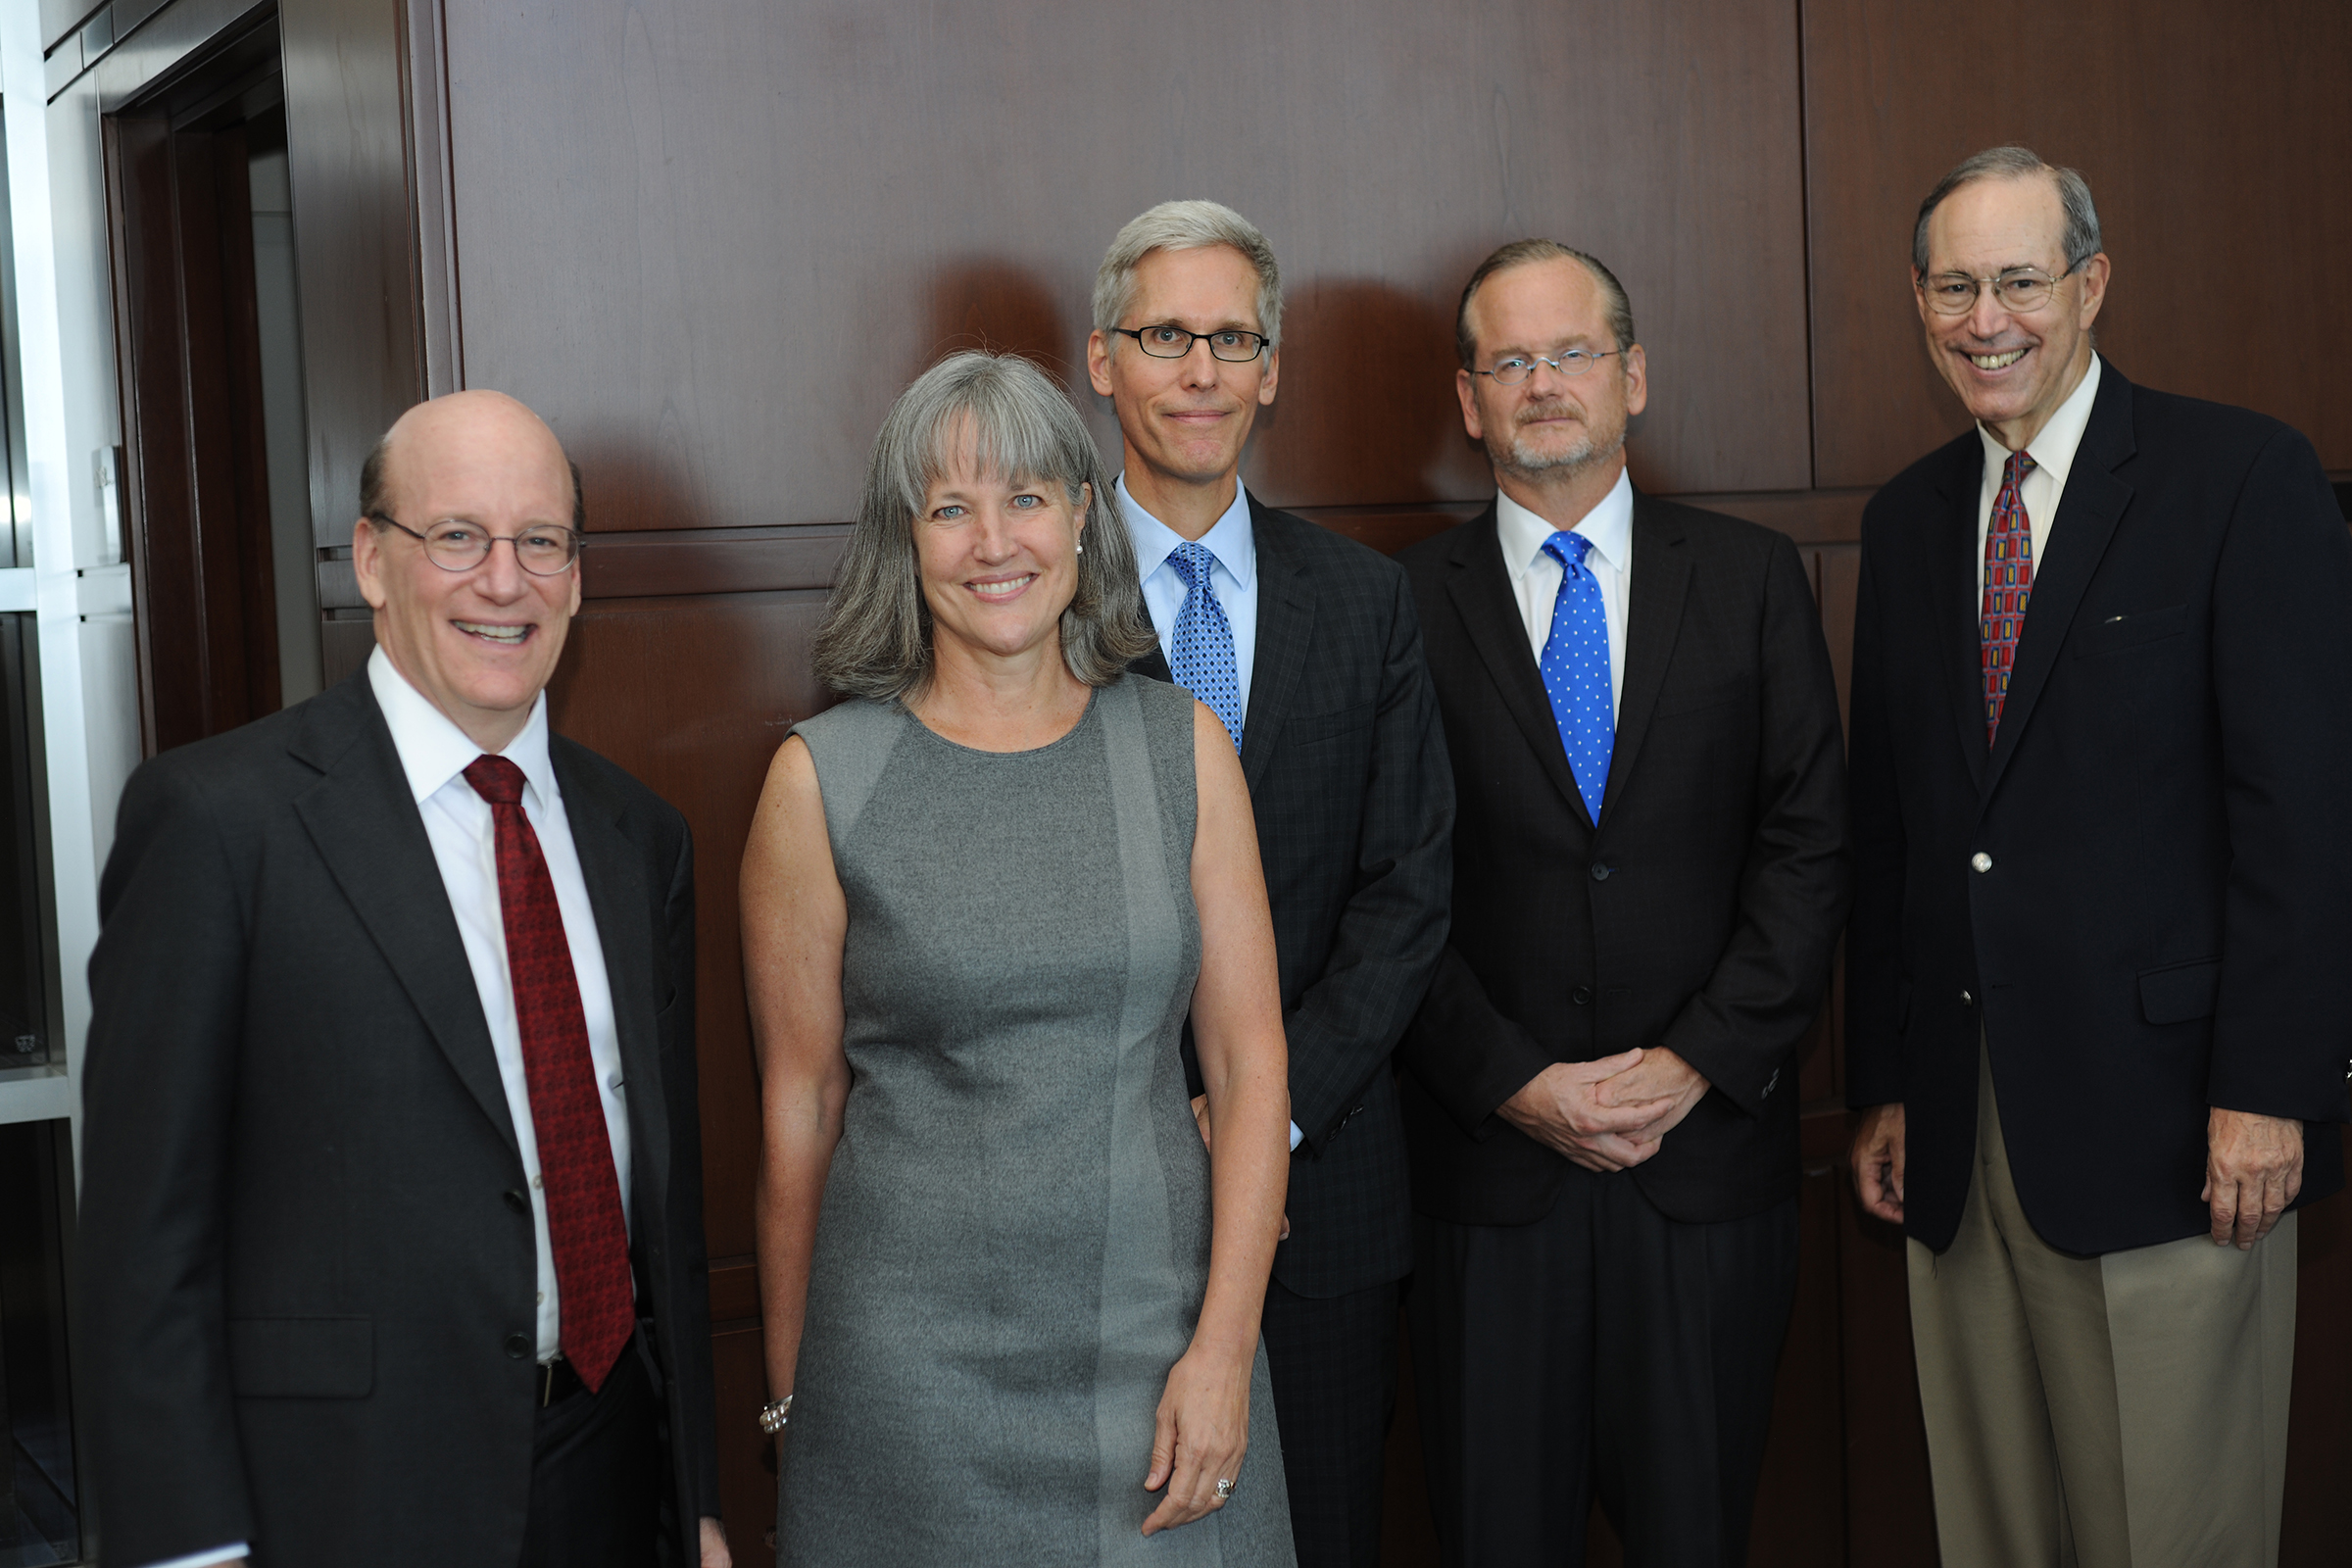 School of Law Dean Andrew Strauss, LHP Director Prof. Susan Wawrose, UD Provost Dr. Paul Benson, Prof. Lawrence Lessig and LHP Roundtable Chair former Ohio Governor Robert Taft. 